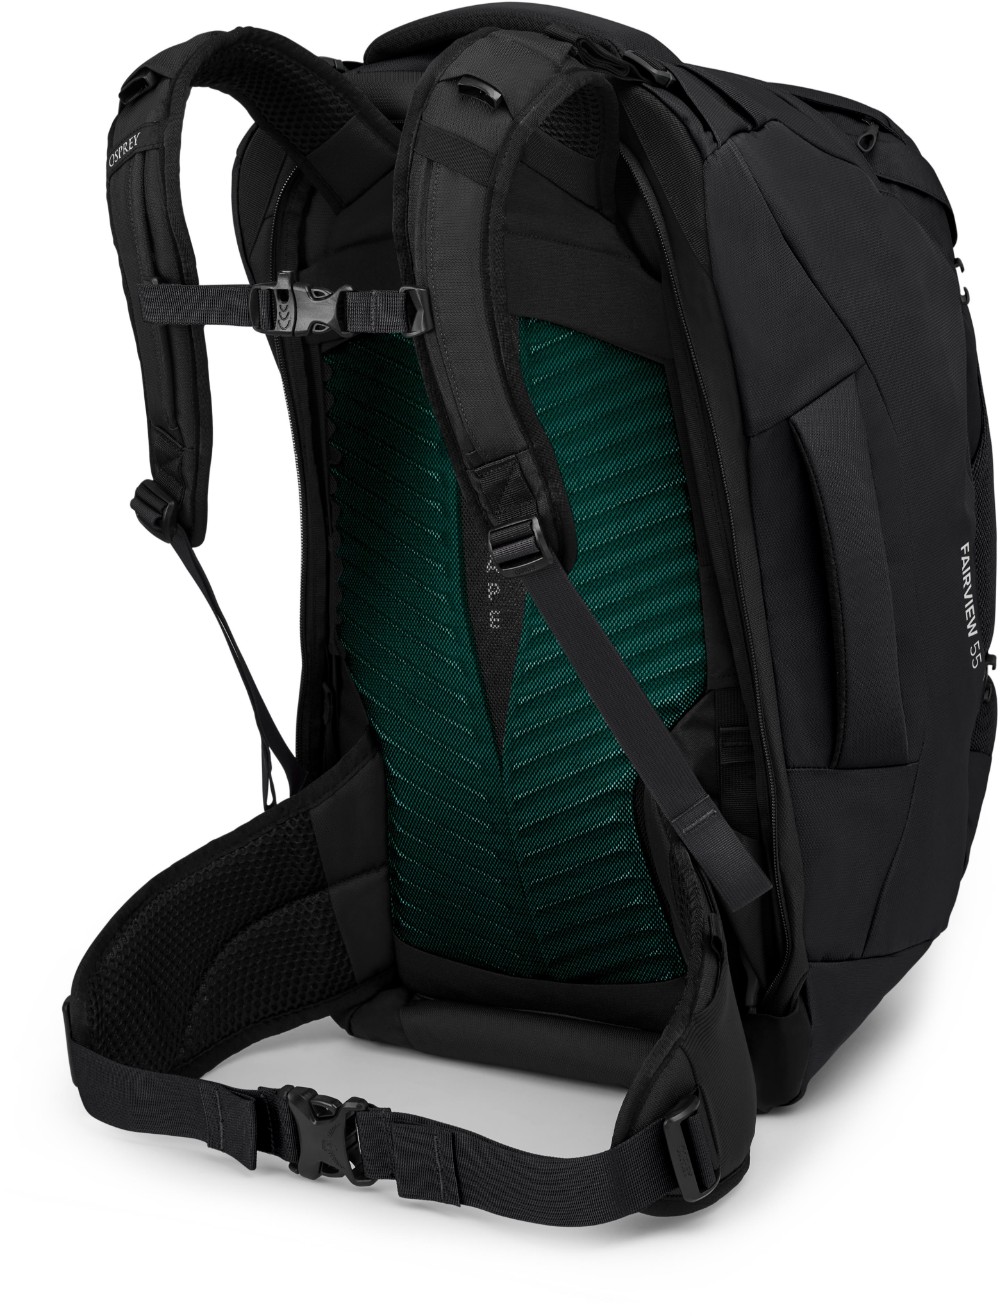 Fairview 55 Womens Travel Backpack image 2